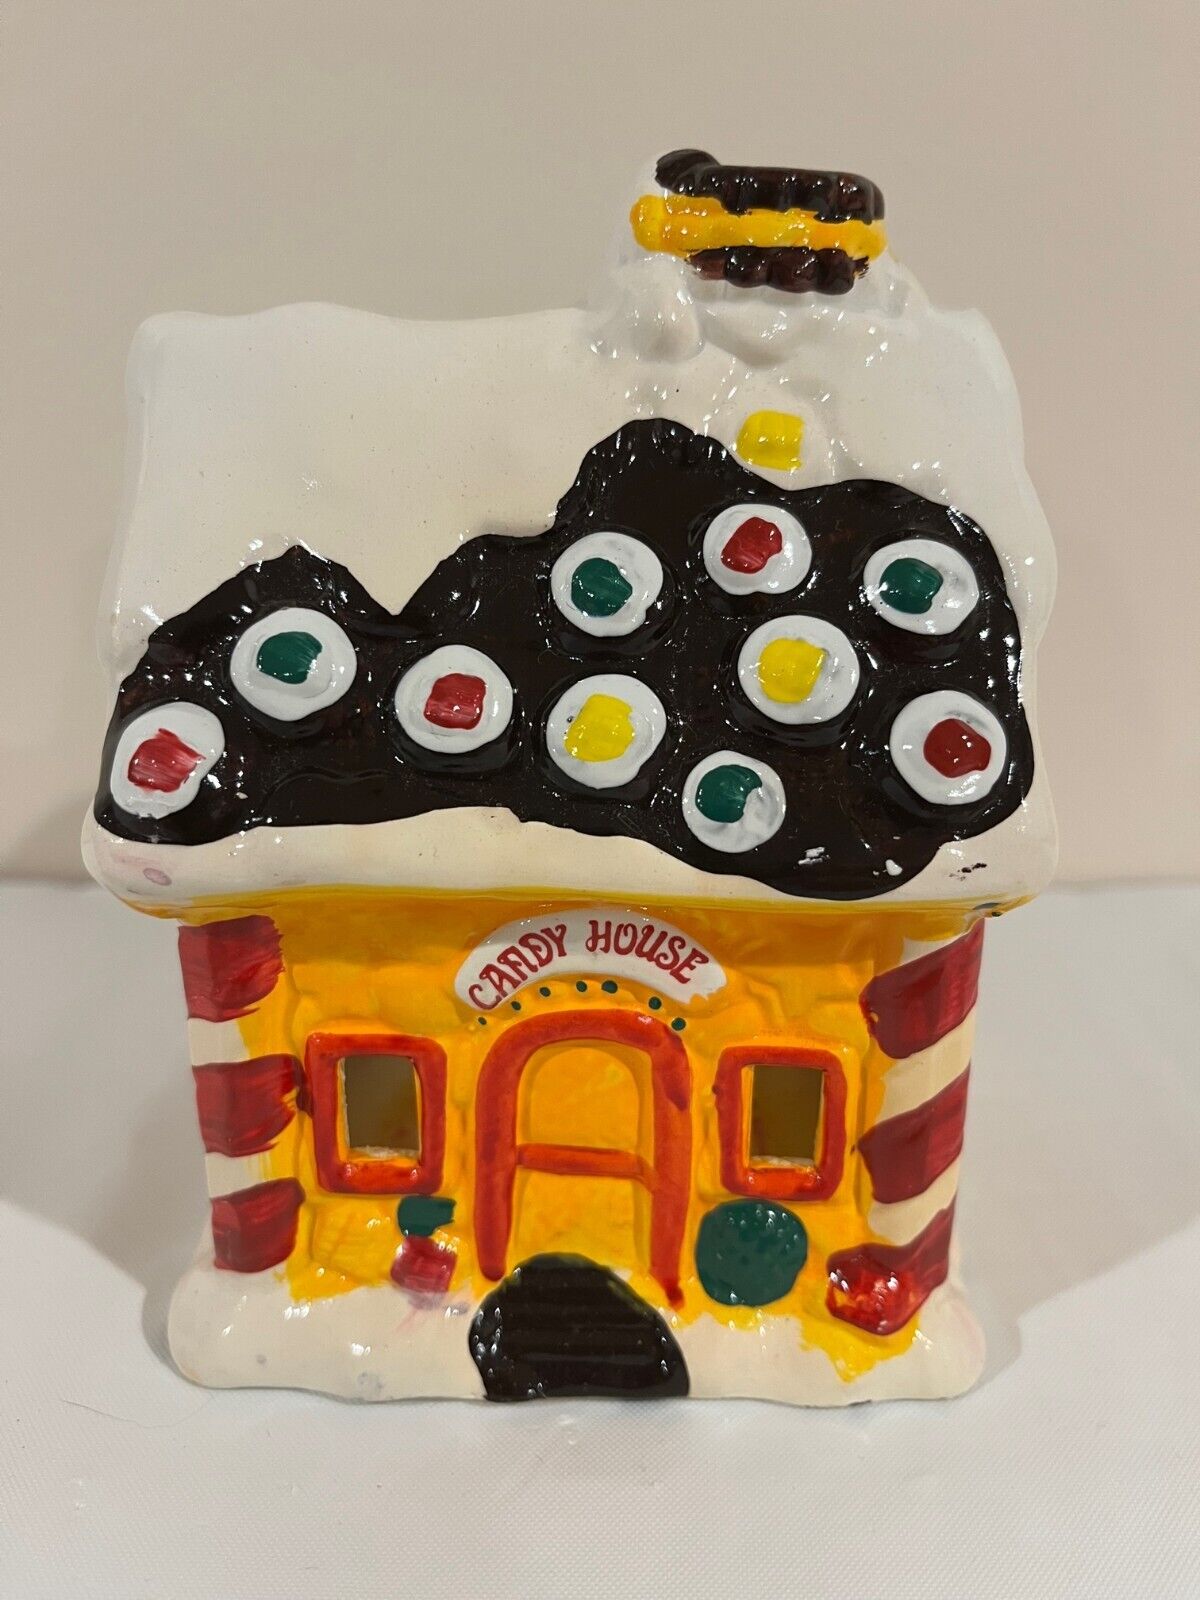 JSNY Holiday Village Candy House Ceramic Candle Holder Hand-Painted 3.75x3.25x5